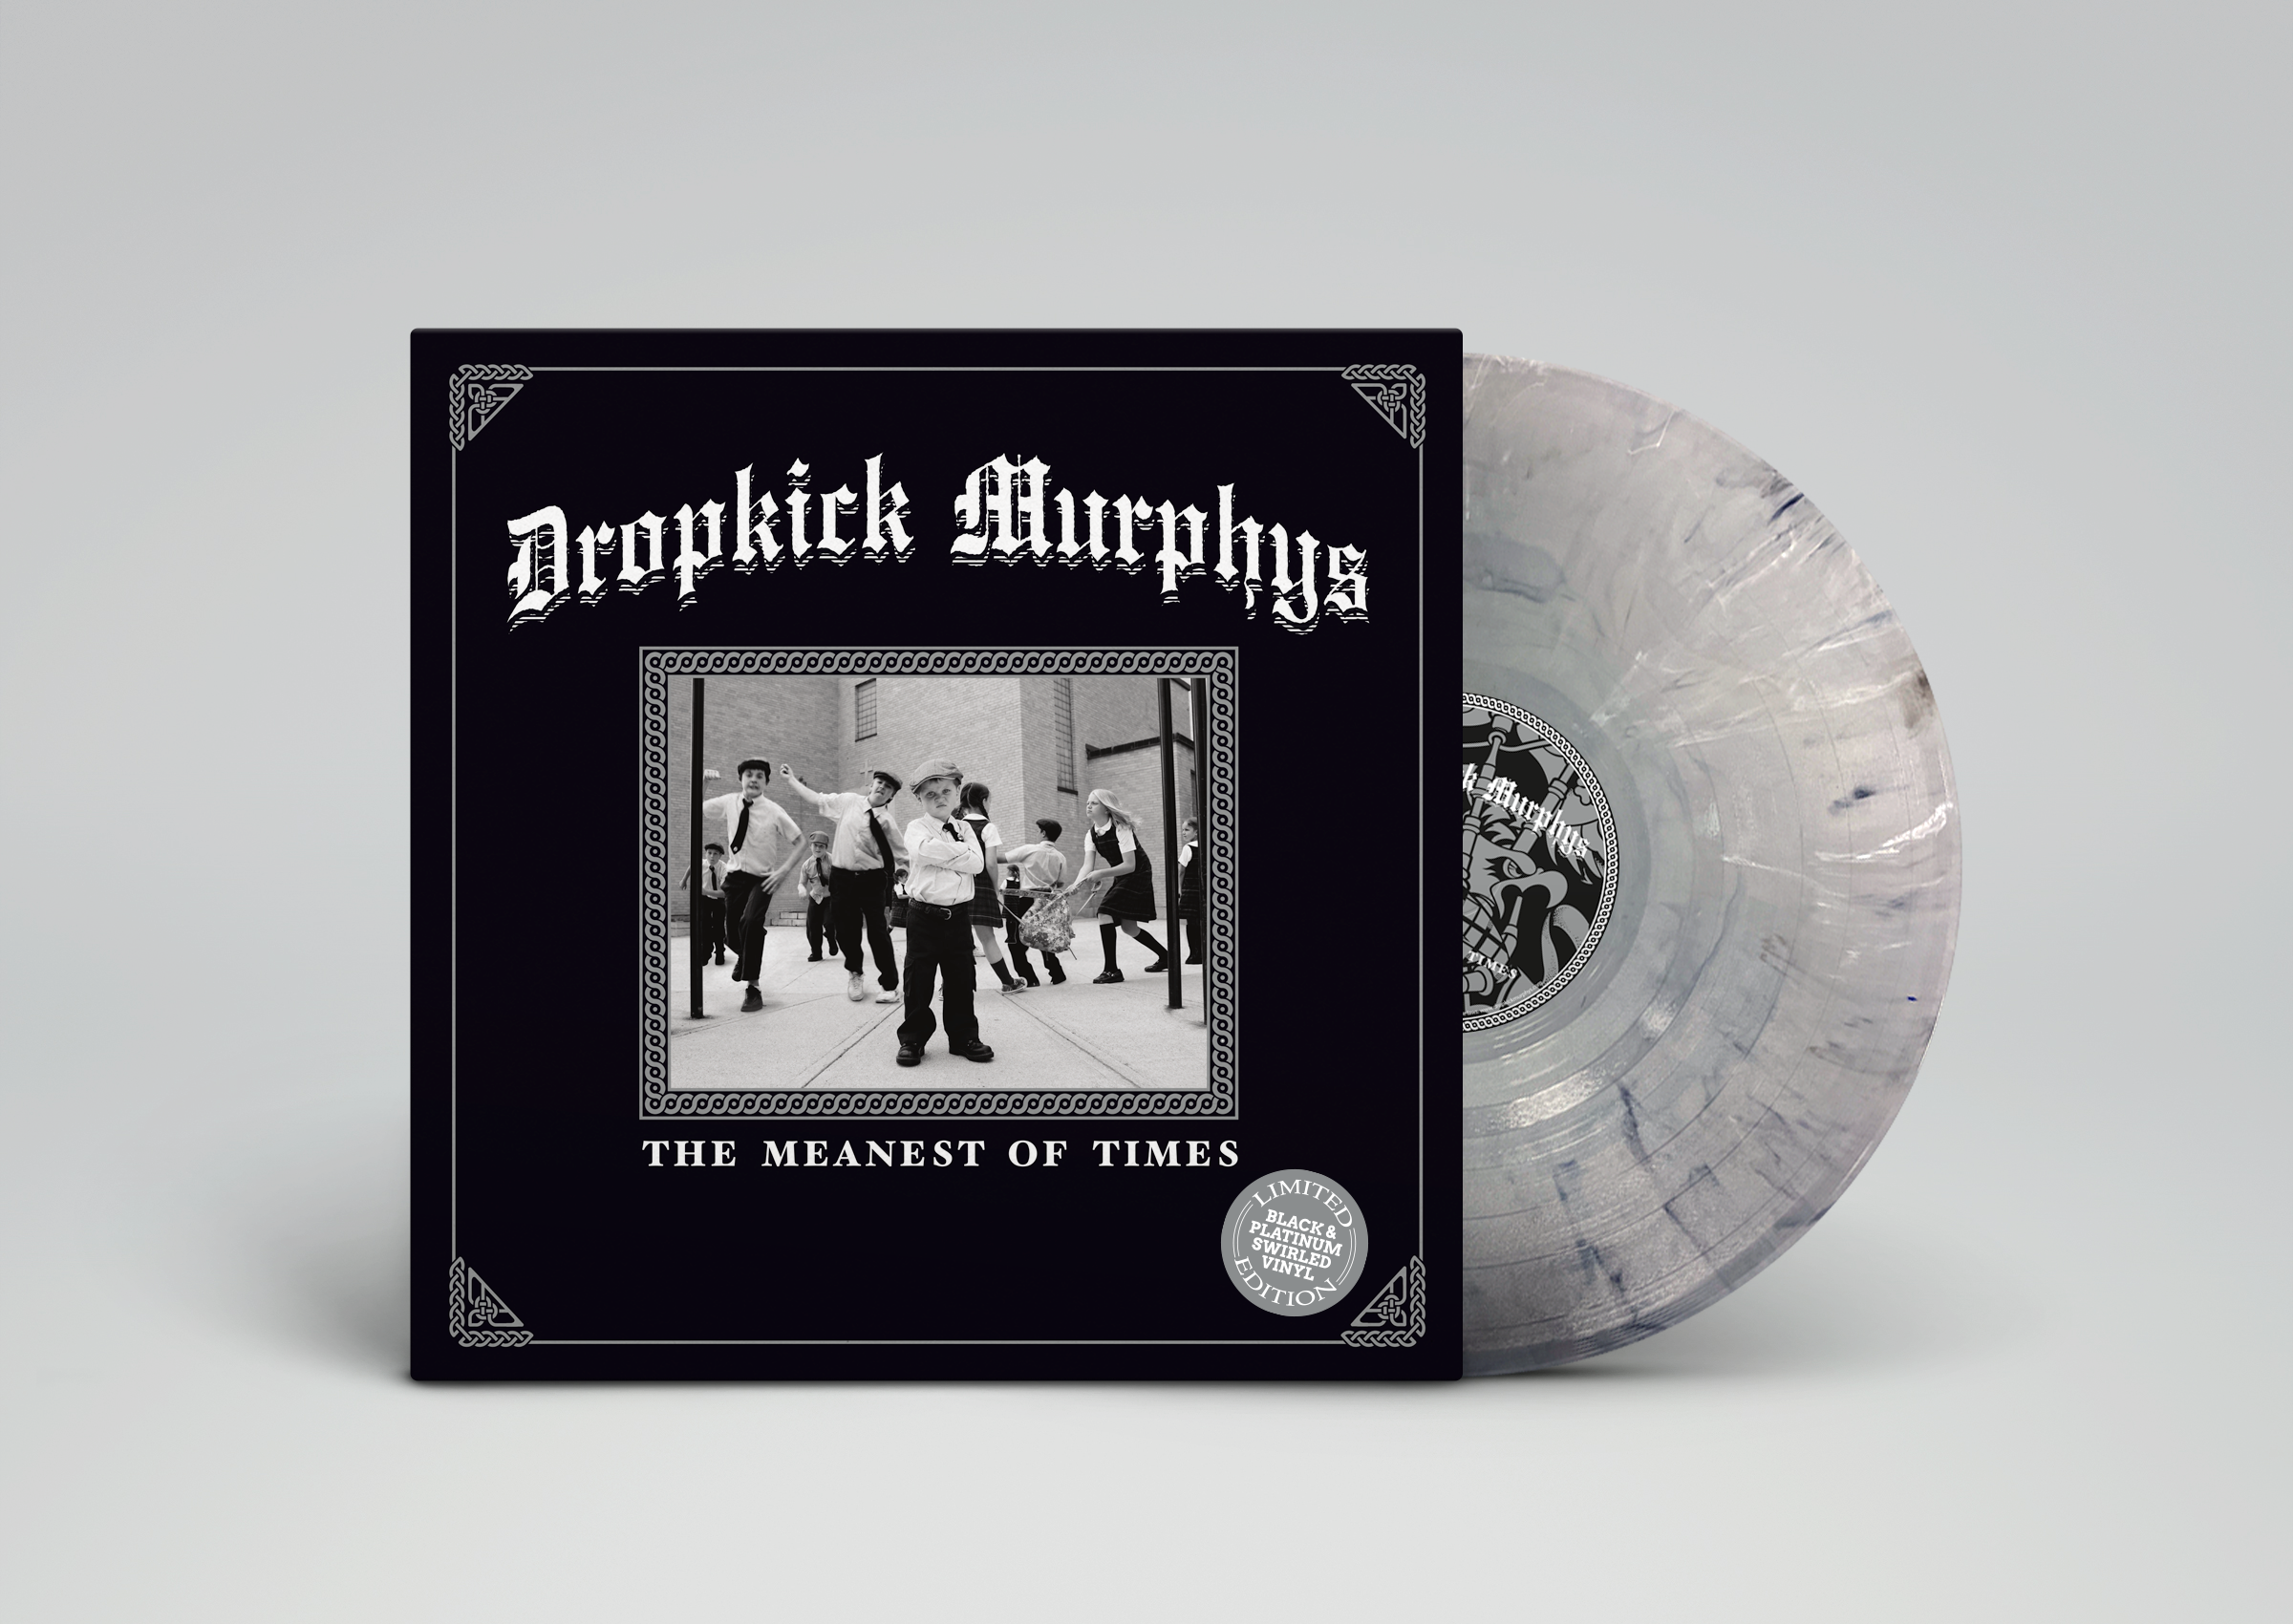 DROPKICK MURPHYS 'THE MEANEST OF TIMES' LP (Limited Edition – Only 500 Made, Black & Platinum Swirl Vinyl)